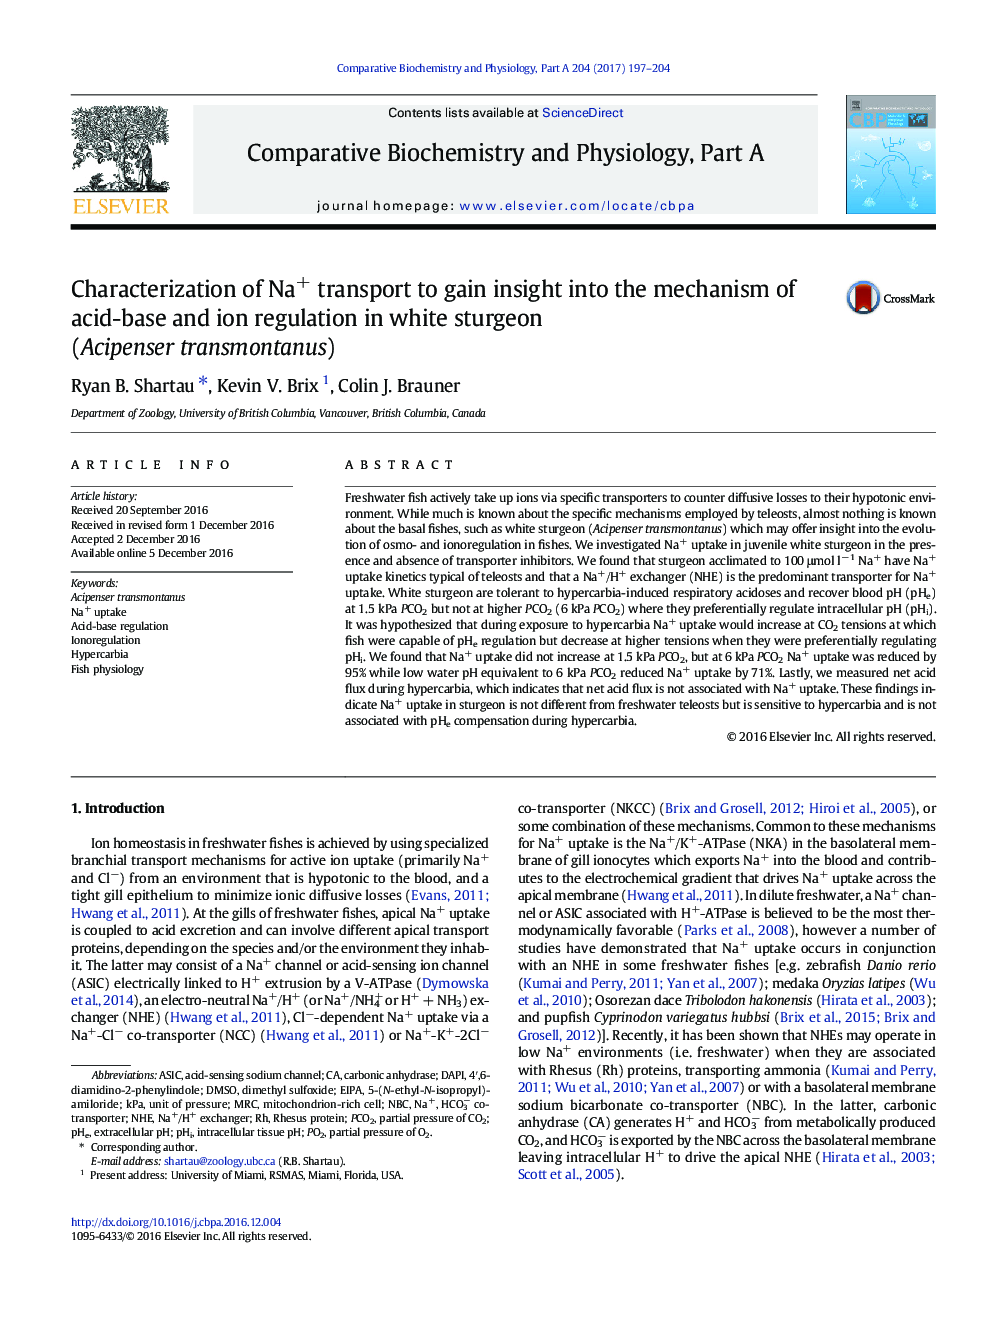 Characterization of Na+ transport to gain insight into the mechanism of acid-base and ion regulation in white sturgeon (Acipenser transmontanus)